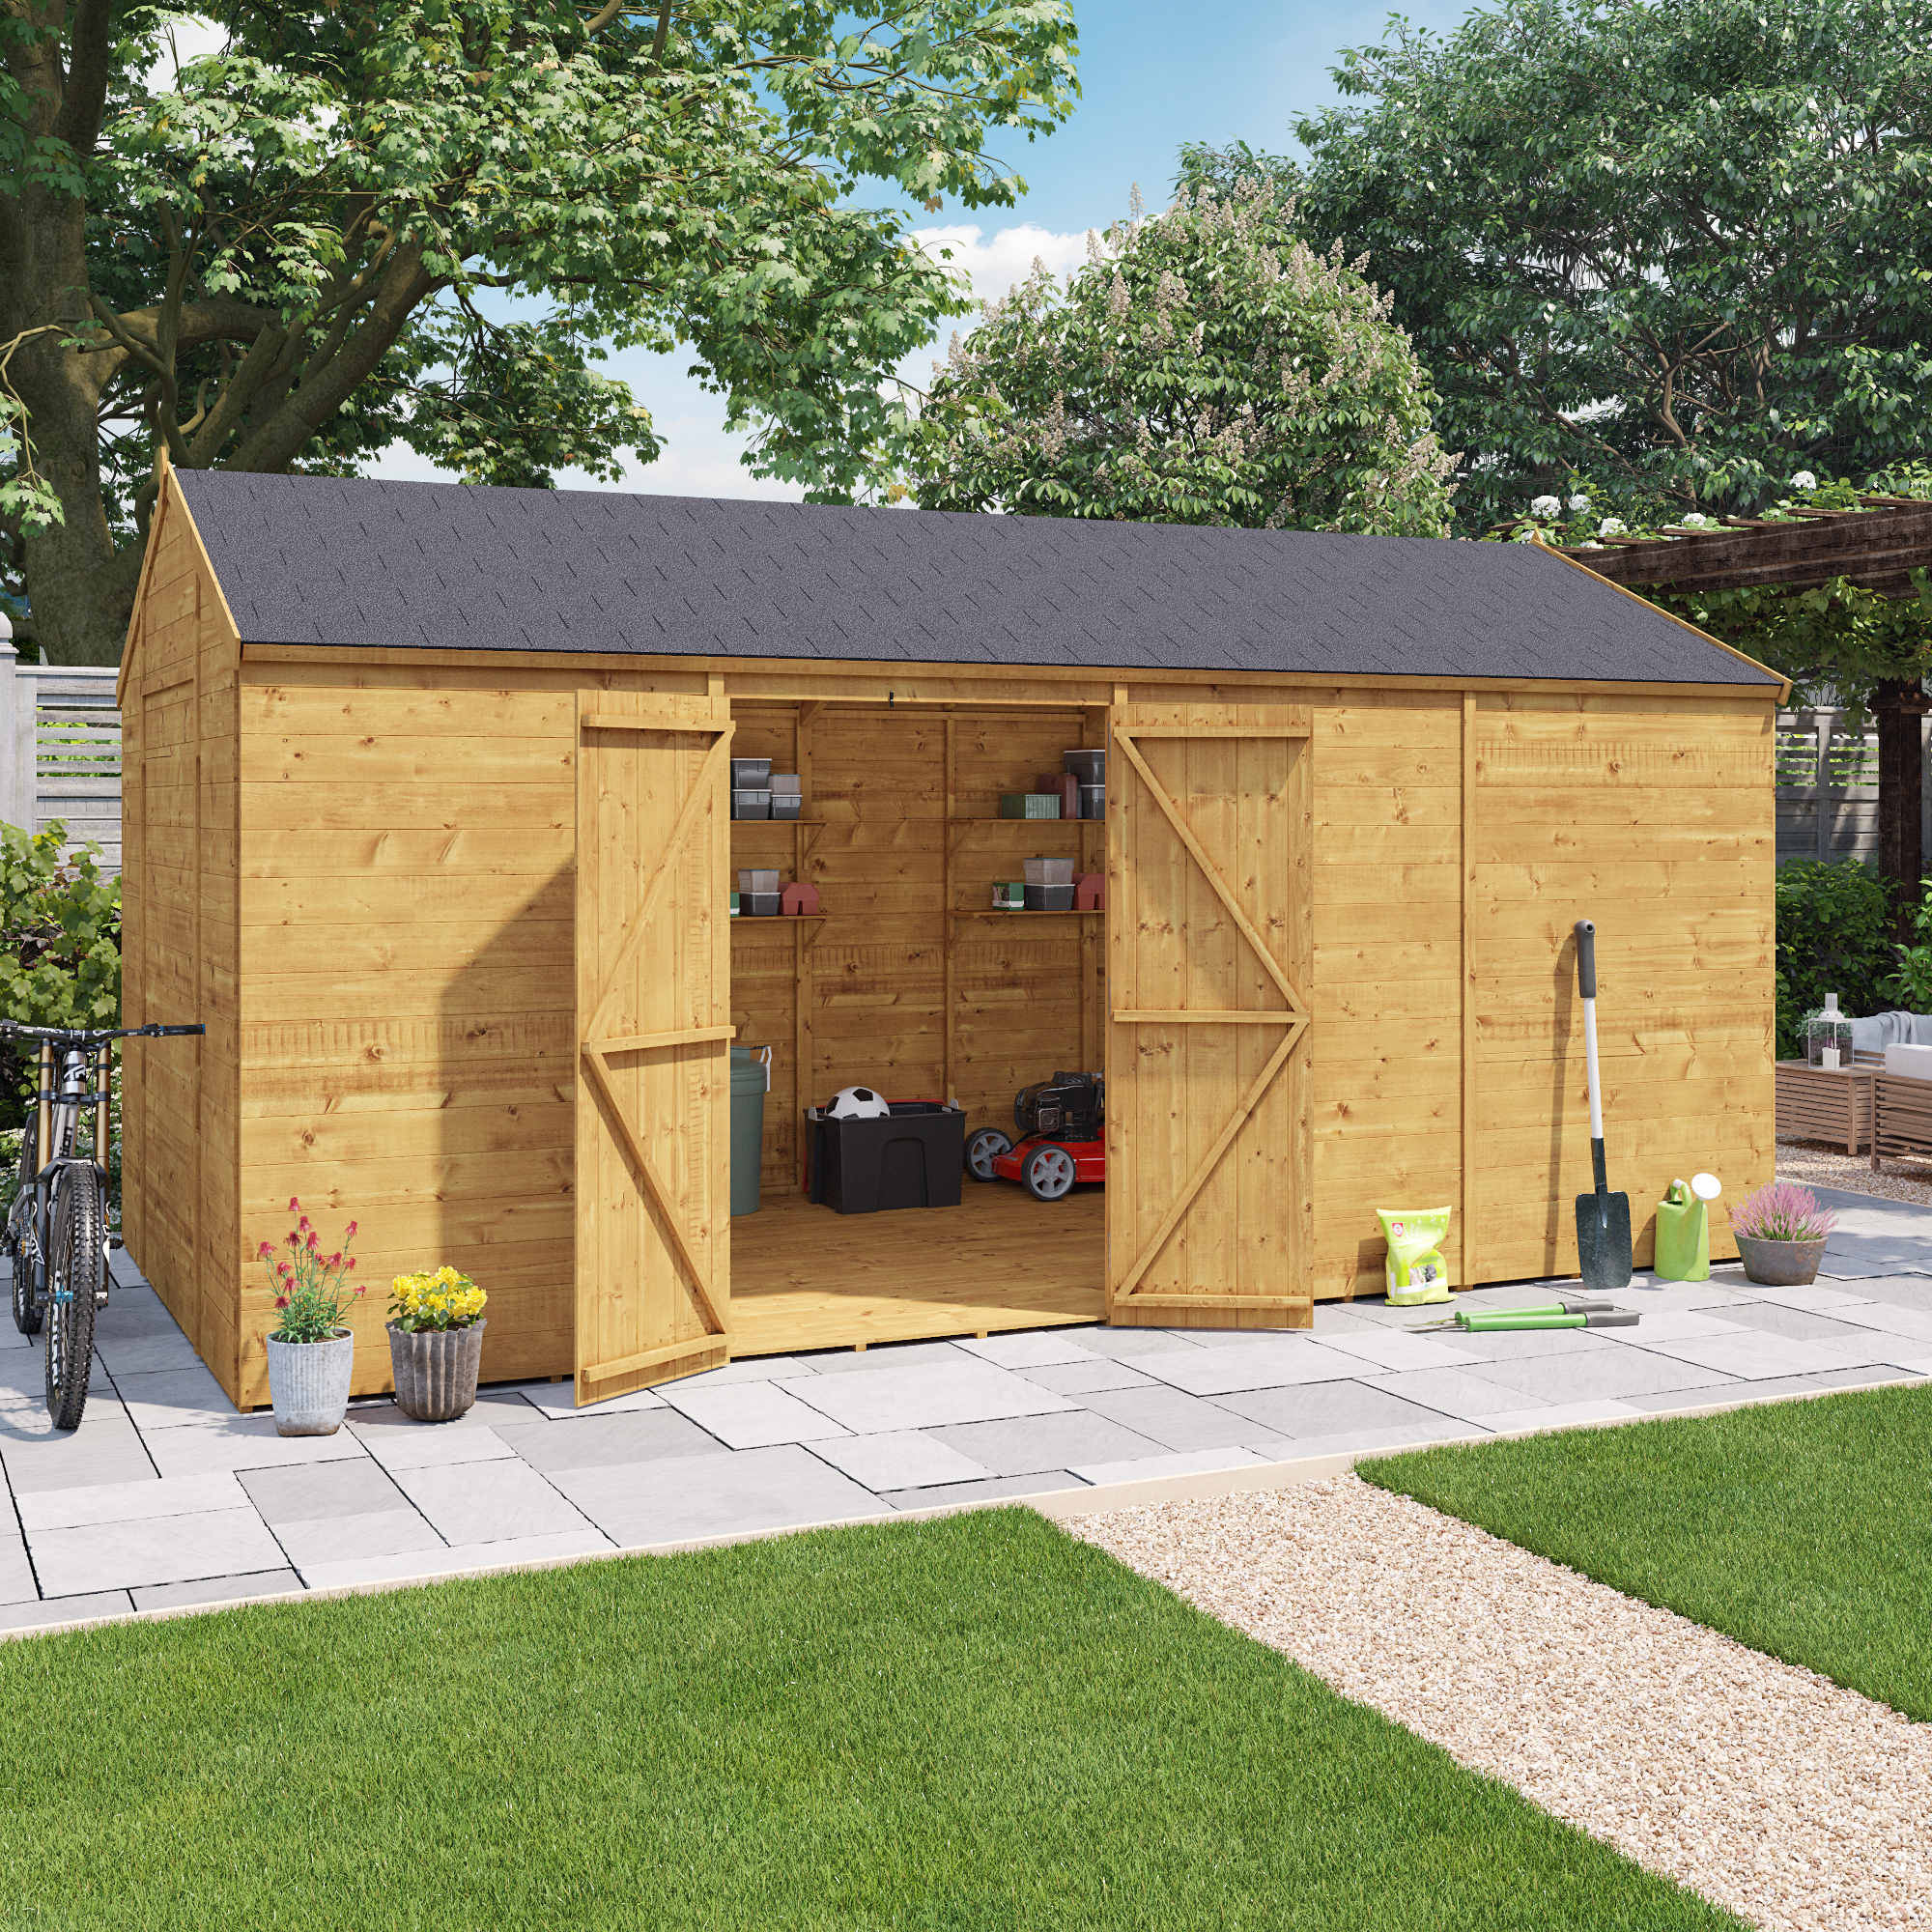 16 x 8 Shed - BillyOh Expert Reverse Workshop Large Garden Shed - Windowless